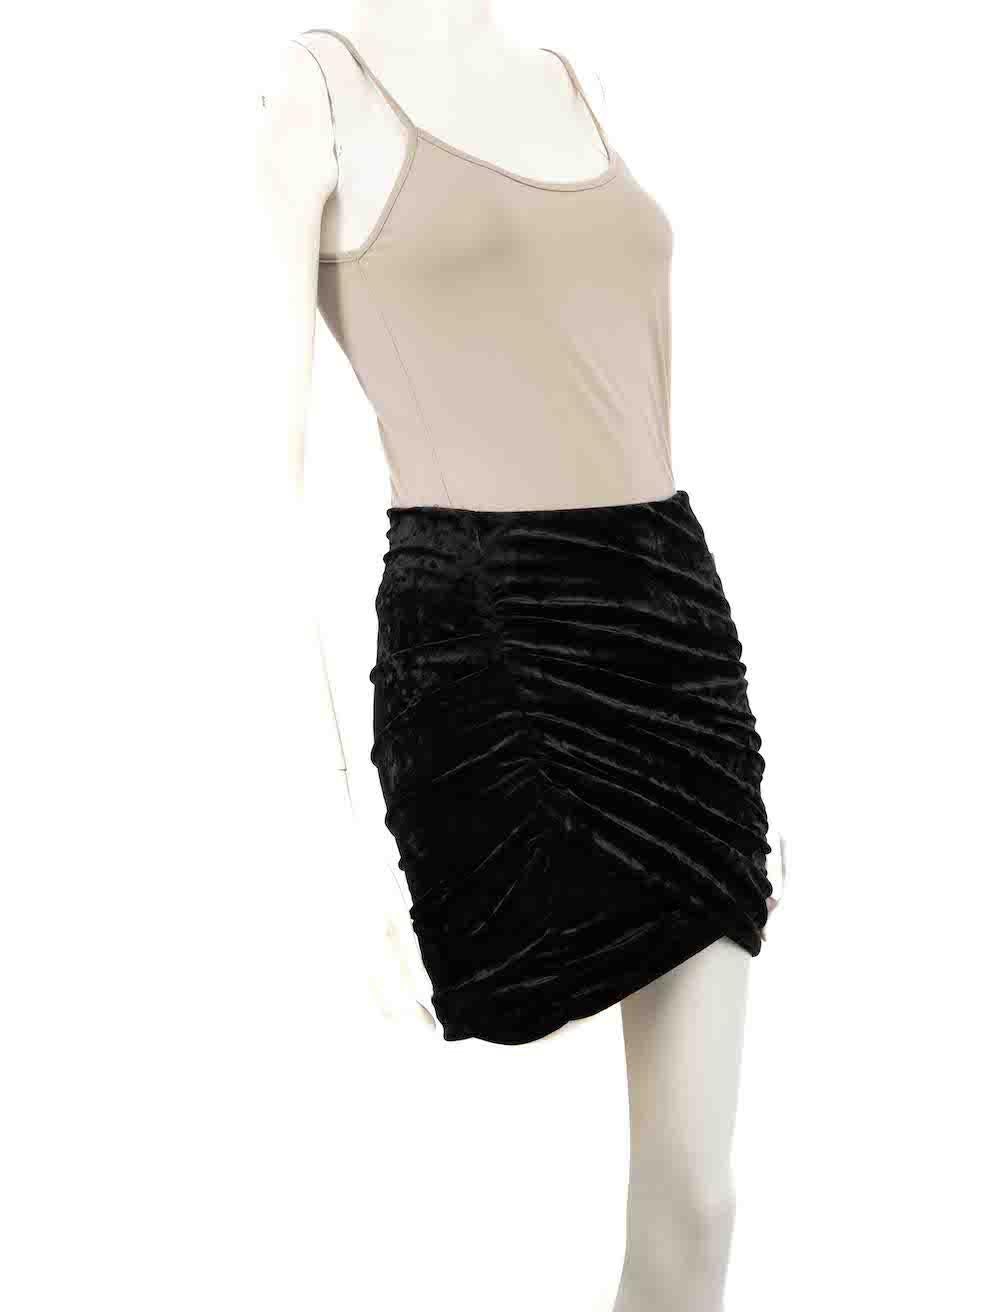 CONDITION is Very good. Minimal wear to skirt is evident. Minimal loose thread to internal waistband seam on this used Isabel Marant designer resale item.
 
 
 
 Details
 
 
 Black
 
 Velvet
 
 Skirt
 
 Mini
 
 Ruched front detail
 
 Figure hugging